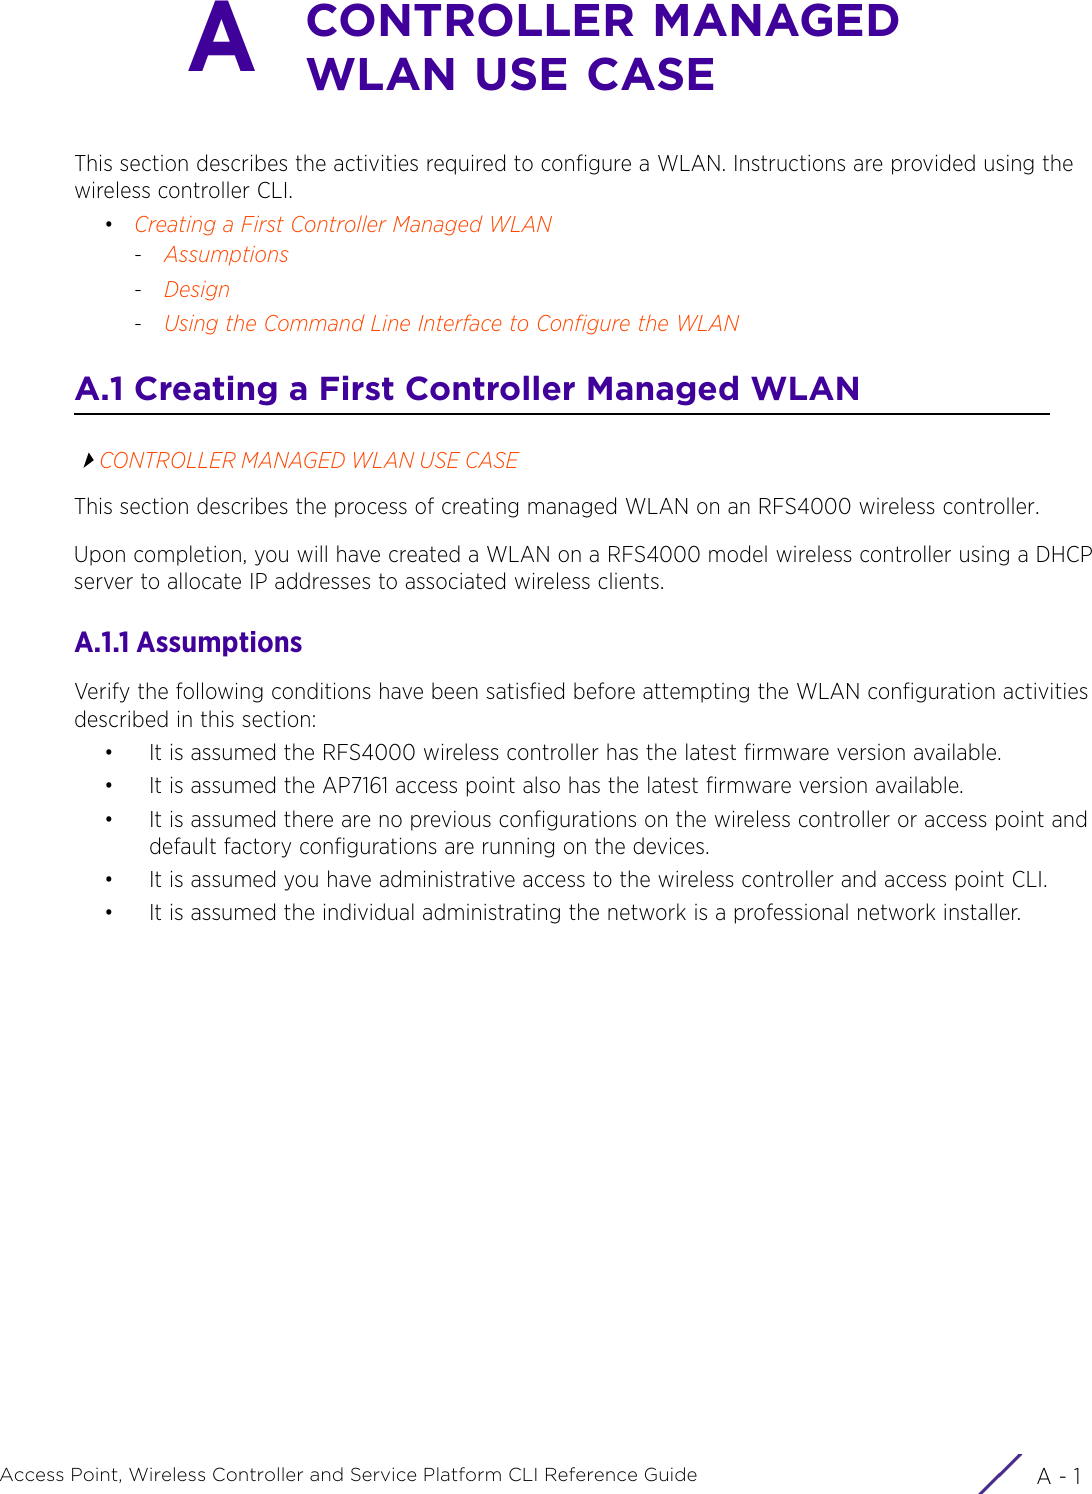 A - 1Access Point, Wireless Controller and Service Platform CLI Reference GuideACONTROLLER MANAGED WLAN USE CASEThis section describes the activities required to configure a WLAN. Instructions are provided using the wireless controller CLI.•Creating a First Controller Managed WLAN-Assumptions-Design-Using the Command Line Interface to Configure the WLANA.1 Creating a First Controller Managed WLANCONTROLLER MANAGED WLAN USE CASEThis section describes the process of creating managed WLAN on an RFS4000 wireless controller.Upon completion, you will have created a WLAN on a RFS4000 model wireless controller using a DHCP server to allocate IP addresses to associated wireless clients.A.1.1 AssumptionsVerify the following conditions have been satisfied before attempting the WLAN configuration activities described in this section:• It is assumed the RFS4000 wireless controller has the latest firmware version available.• It is assumed the AP7161 access point also has the latest firmware version available.• It is assumed there are no previous configurations on the wireless controller or access point and default factory configurations are running on the devices.• It is assumed you have administrative access to the wireless controller and access point CLI.• It is assumed the individual administrating the network is a professional network installer.